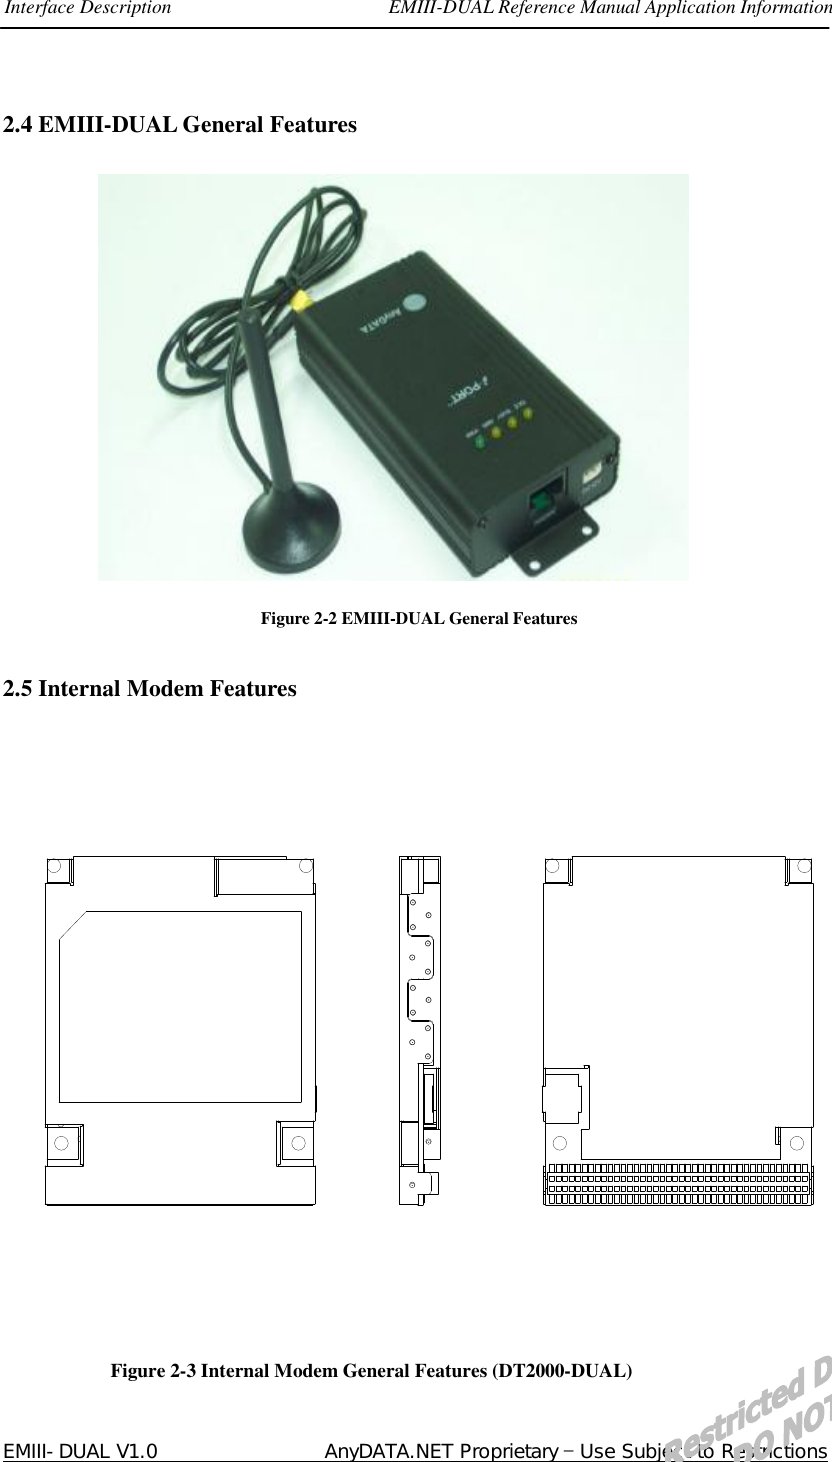 Interface Description                      EMIII-DUAL Reference Manual Application Information  EMIII-DUAL V1.0                 AnyDATA.NET Proprietary – Use Subject to Restrictions 2.4 EMIII-DUAL General Features               Figure 2-2 EMIII-DUAL General Features  2.5 Internal Modem Features  Figure 2-3 Internal Modem General Features (DT2000-DUAL) 